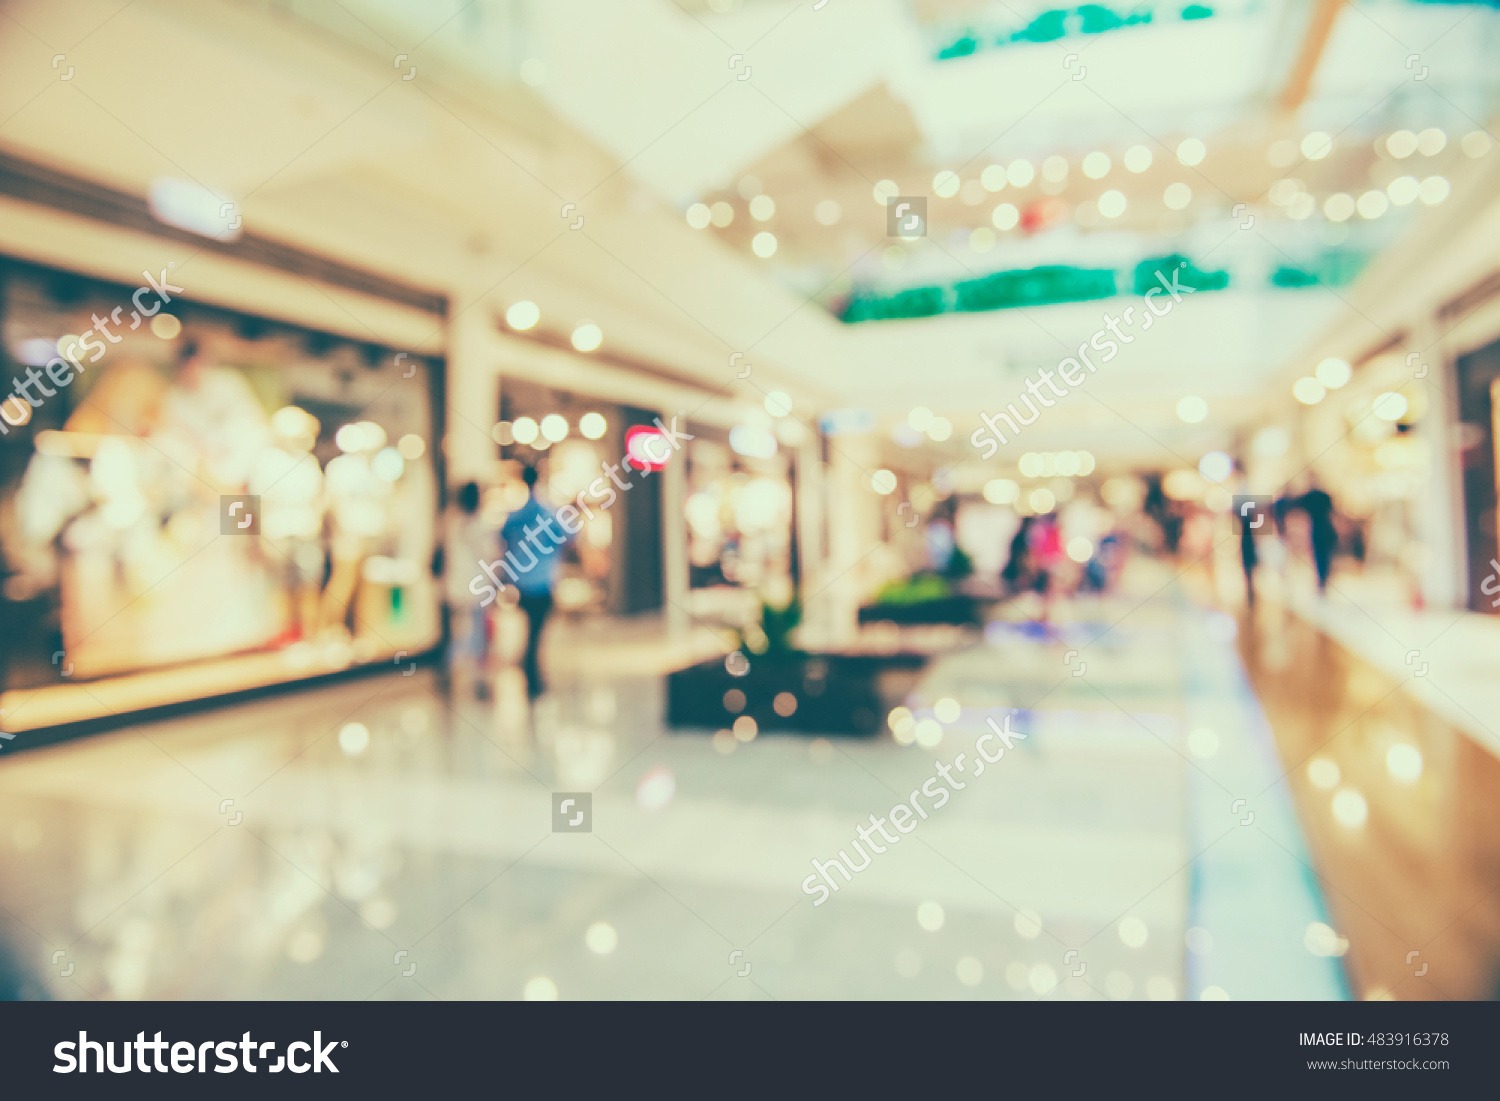 stock-photo-abstract-background-of-shopping-mall-shallow-depth-of-focus-483916378